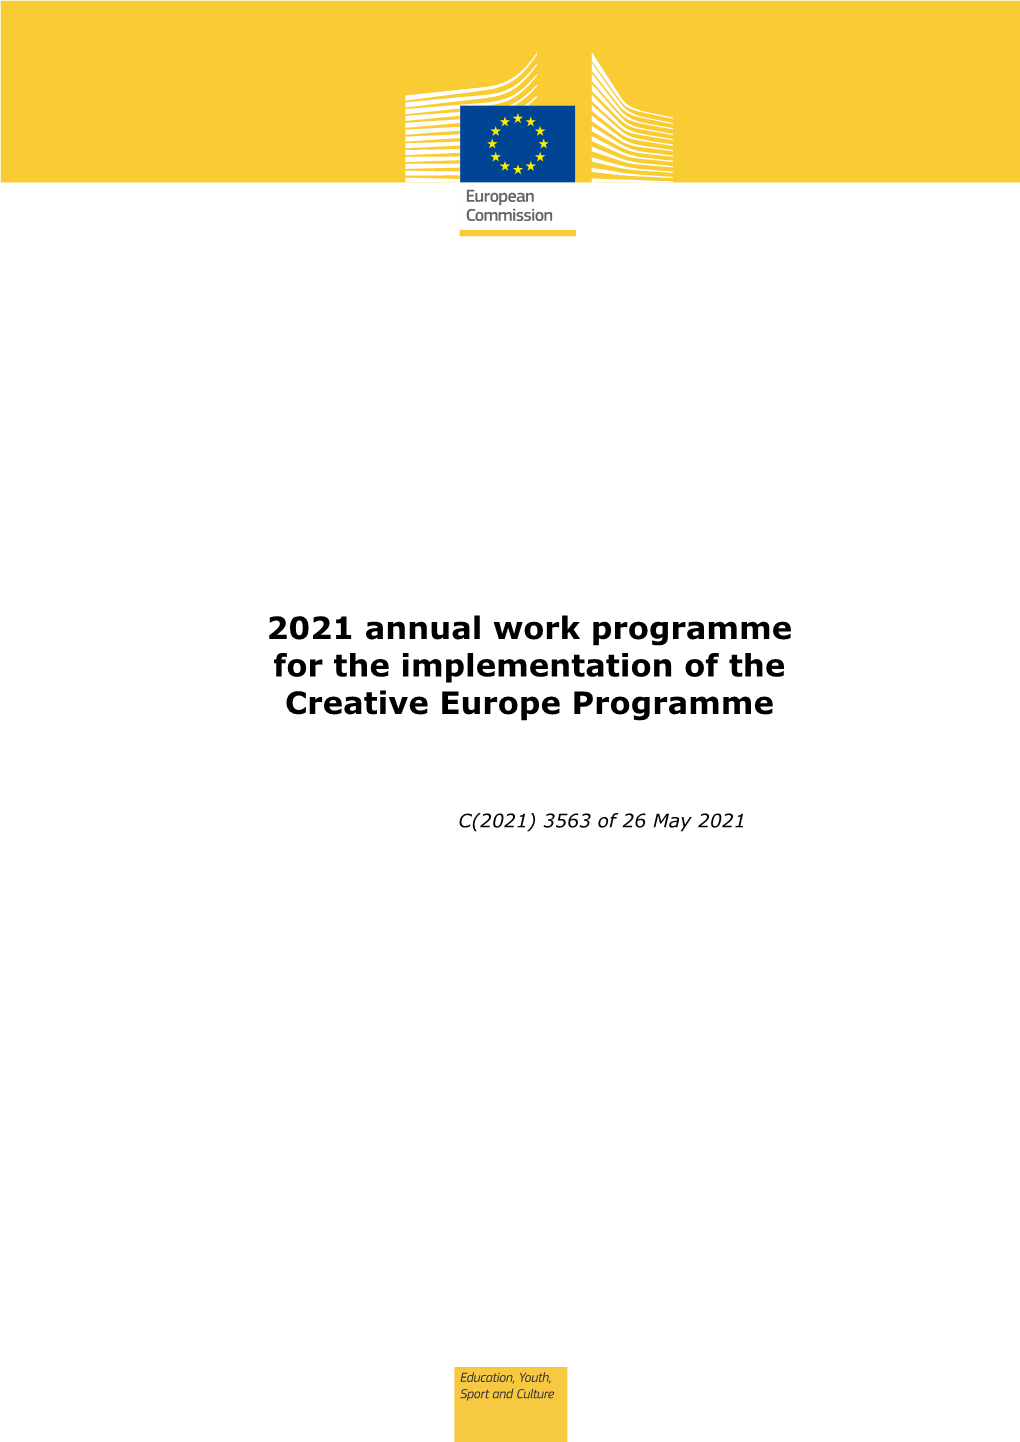 2021 Annual Work Programme for the Implementation of the Creative Europe Programme